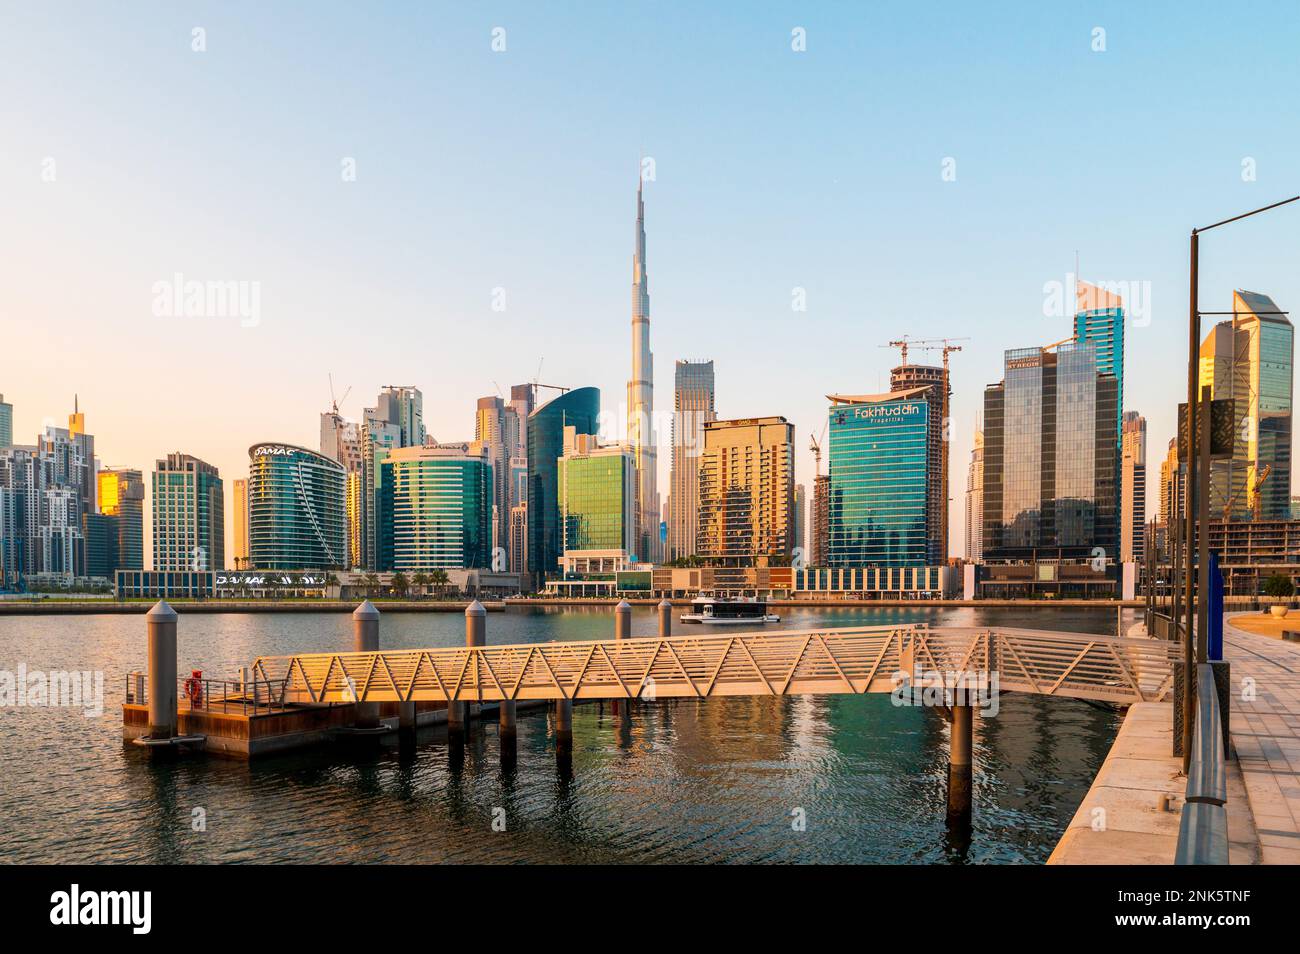 Dubai, United Arab Emirates - September 10, 2022: Dubai Skyline of a bustling downtown city seen from the Business bay area, surrounded by skyscrapers Stock Photo